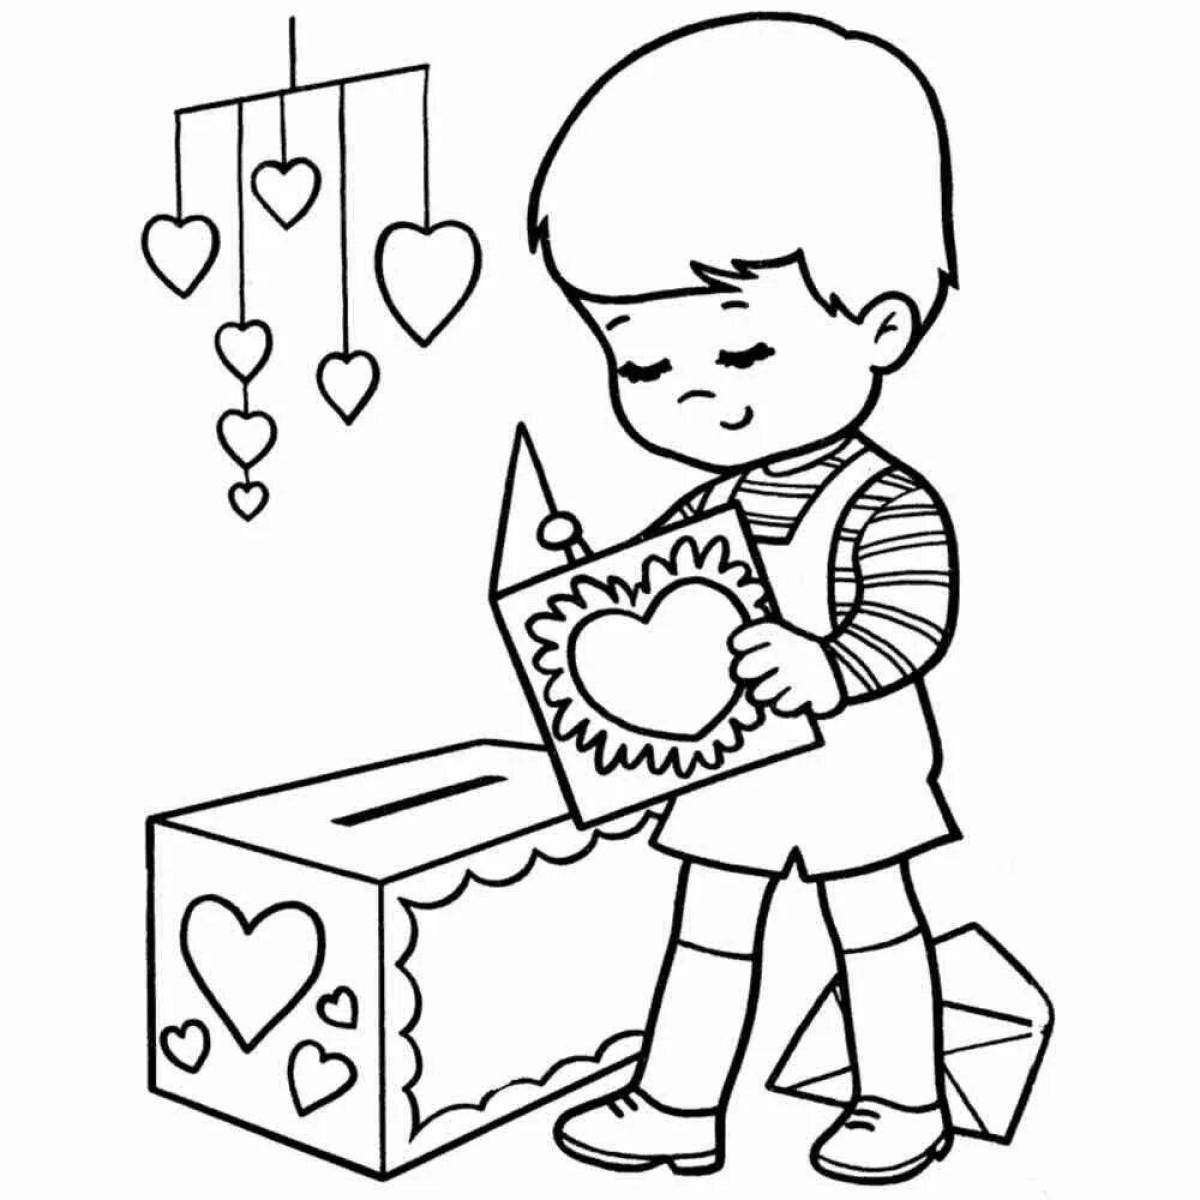 Playful gift for dad coloring pages